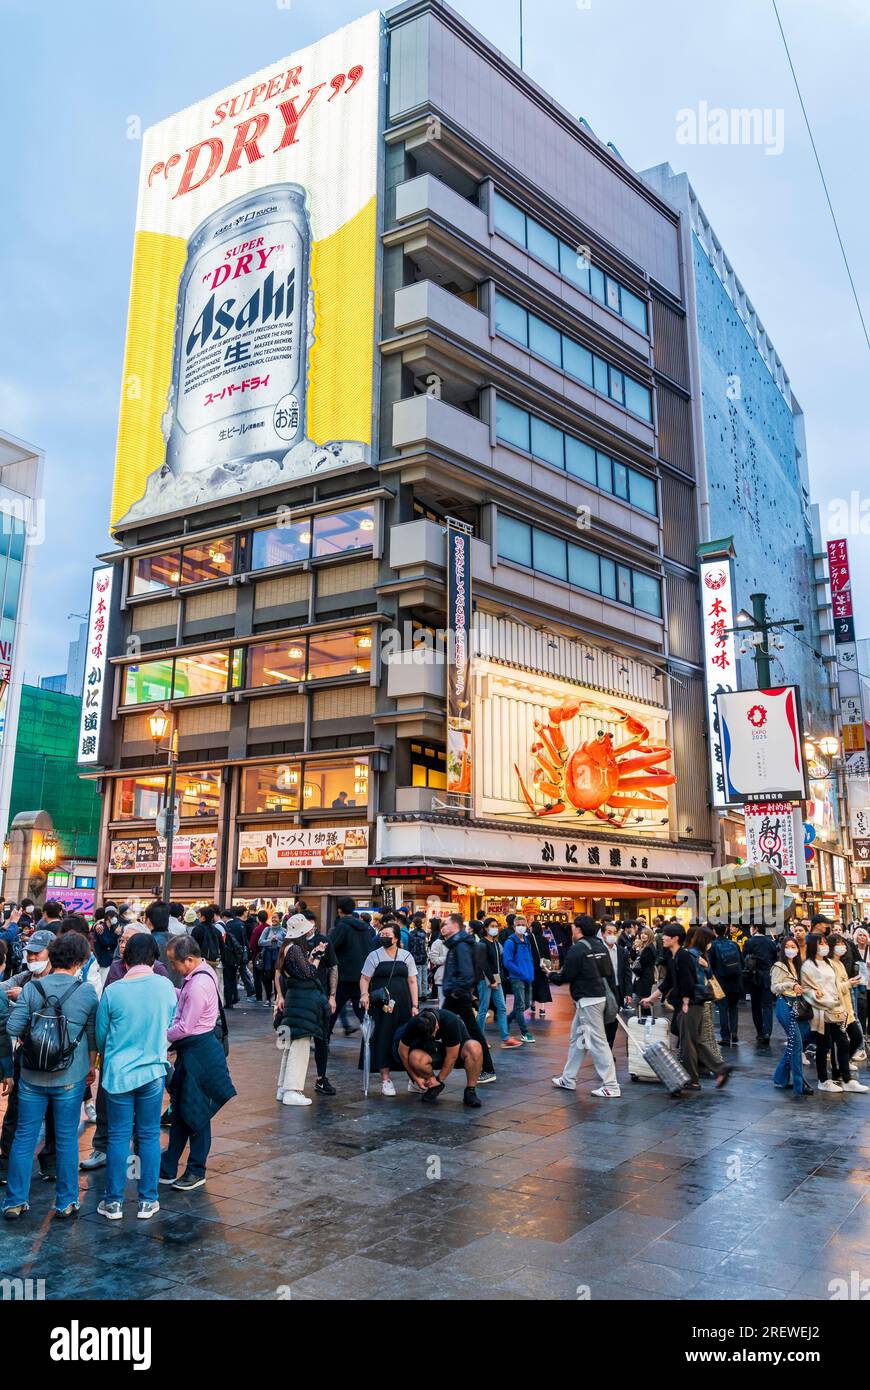 The popular Kani Doraku restaurant with its famous mechanical crab sign above the main entrance and the neon berry can sign at Dotonbori, Osaka. Night. Stock Photo